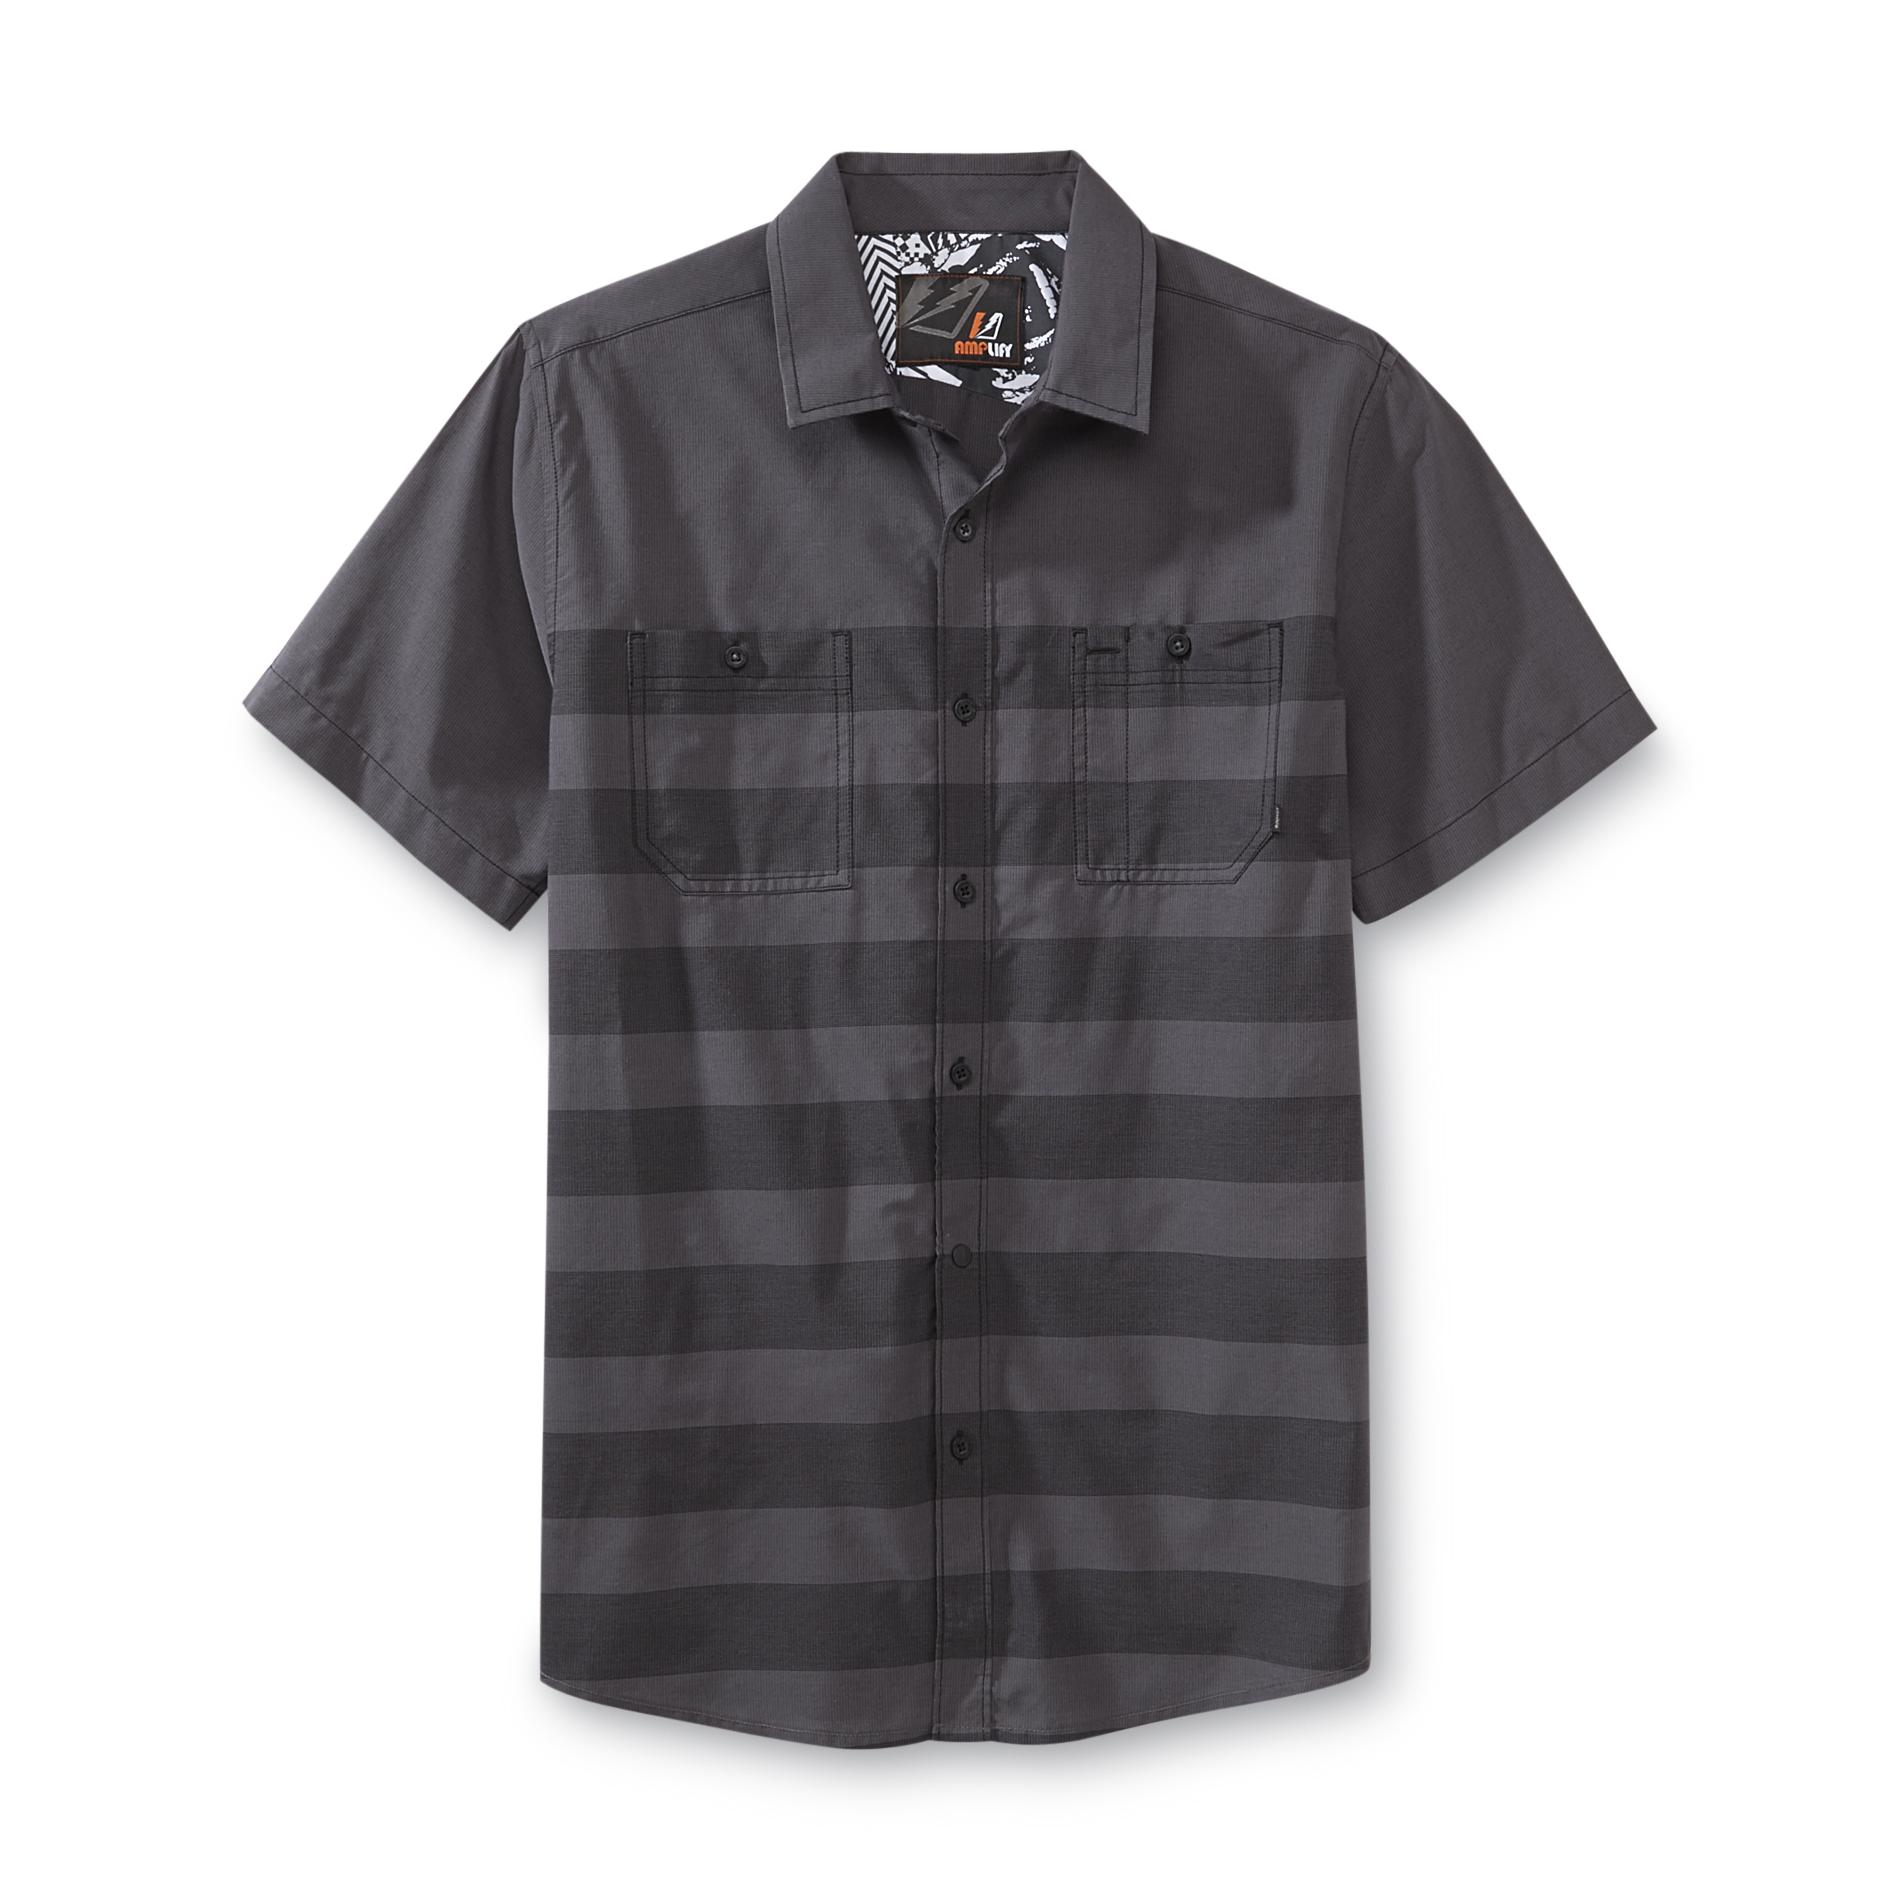 Amplify Young Men's Short-Sleeve Shirt - Shadow Striped